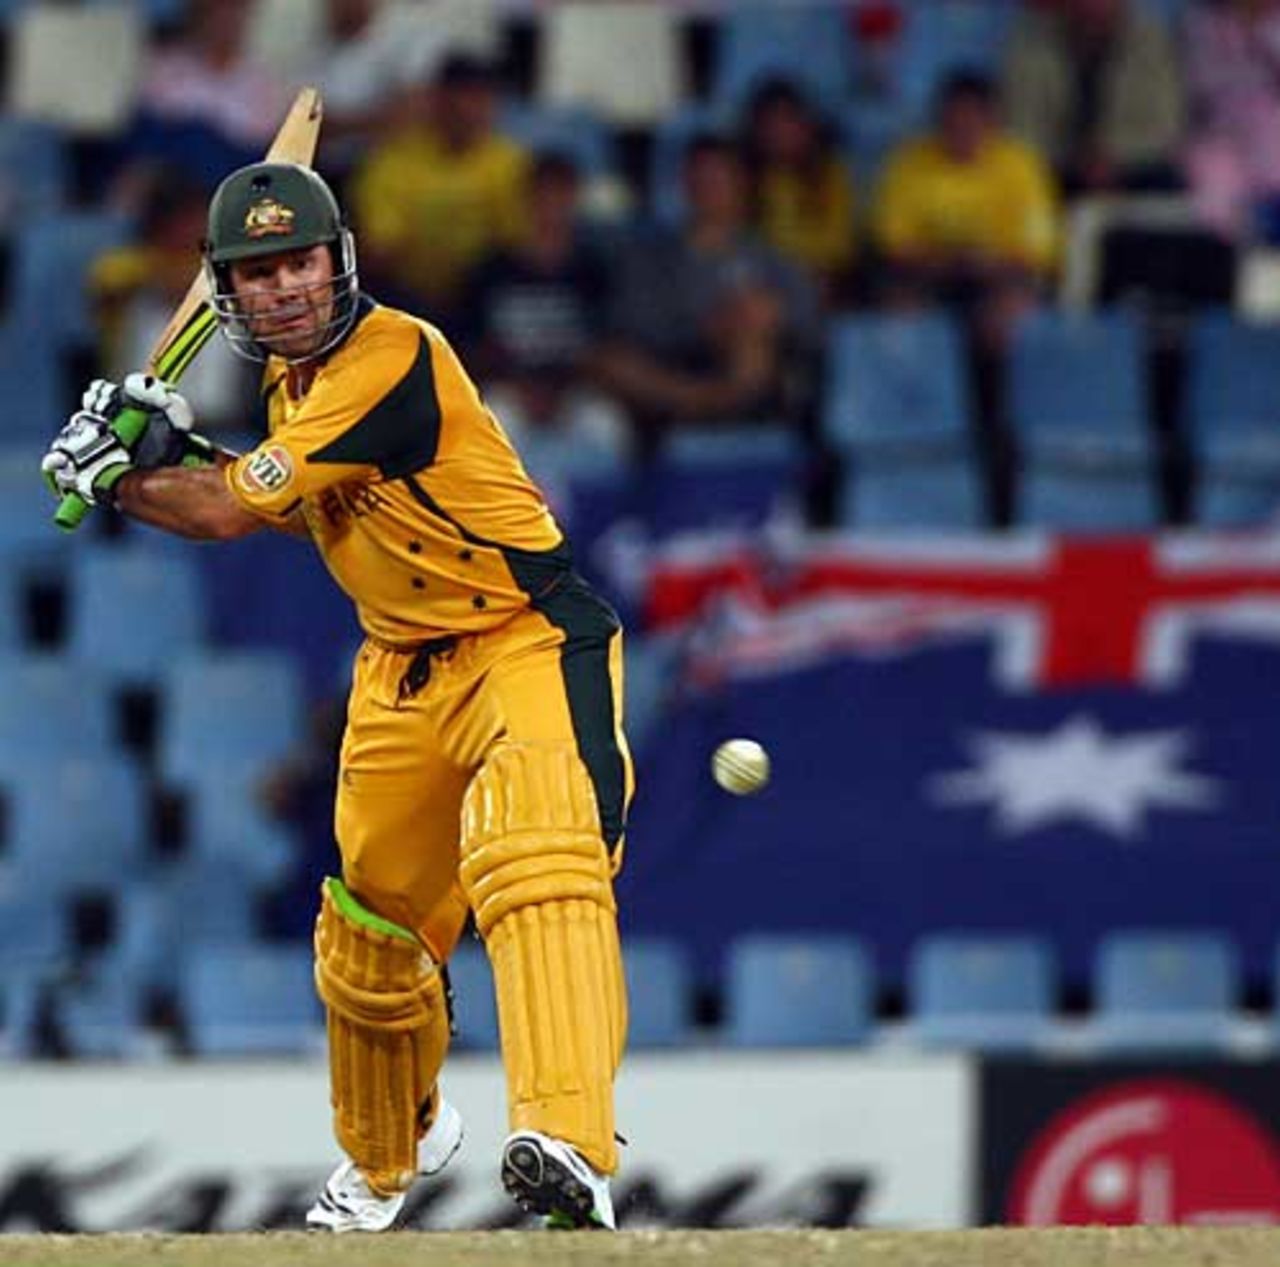 Ricky Ponting barely put a foot wrong during his hundred, Australia v England, 1st semi-final, Champions Trophy, Centurion Park, October 2, 2009